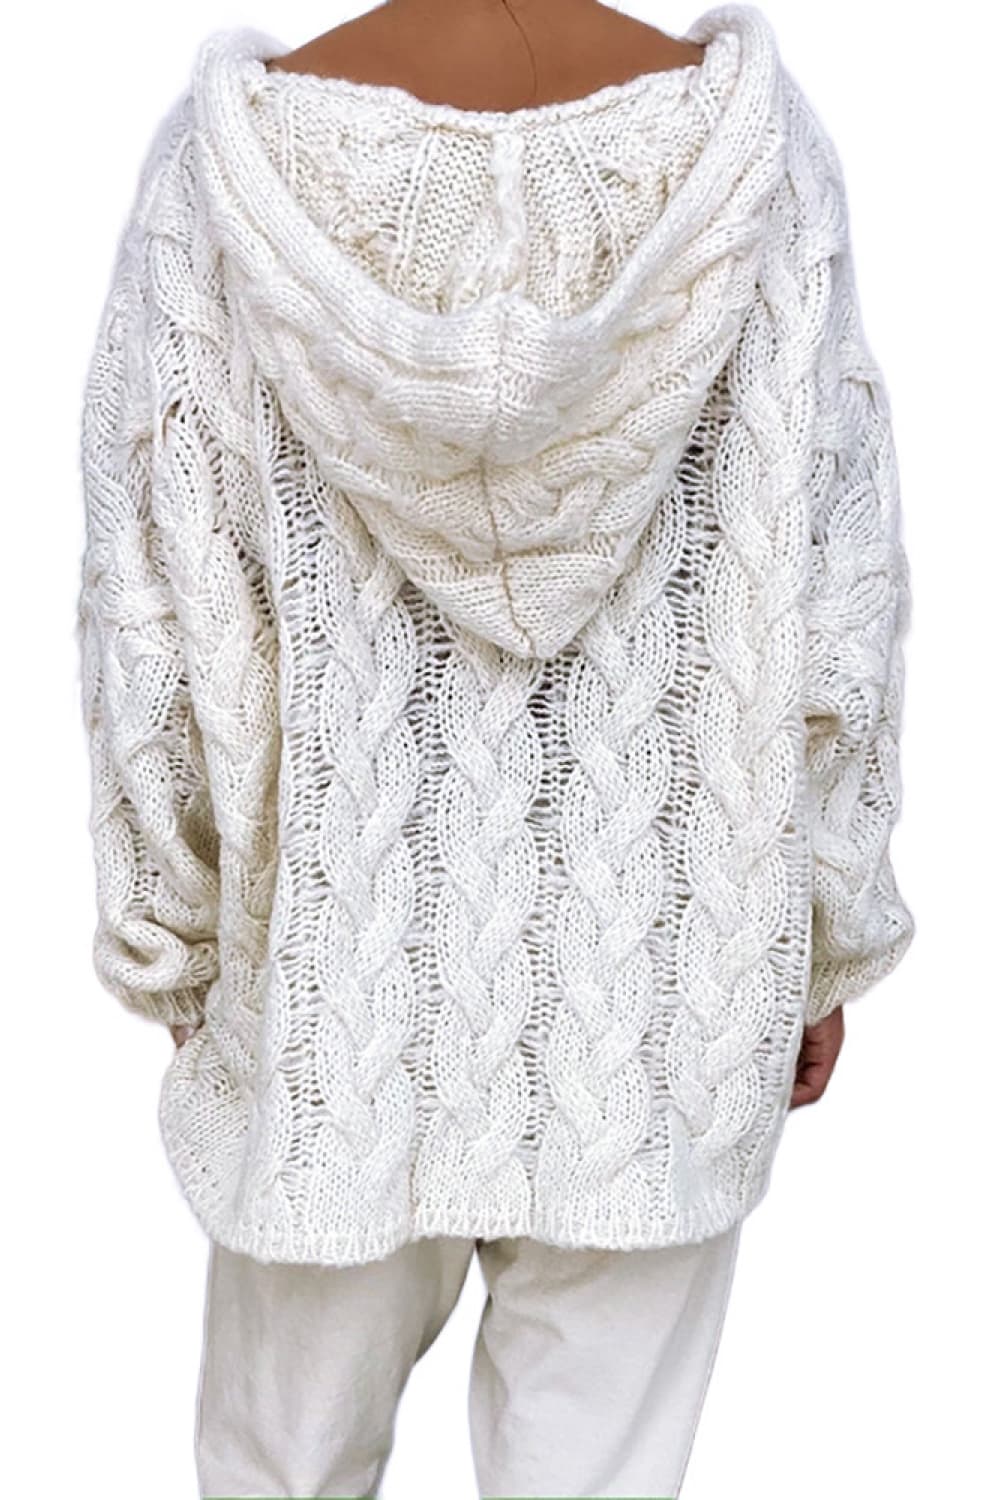 Cable-Knit Hooded Sweater - Lola Cerina Boutique